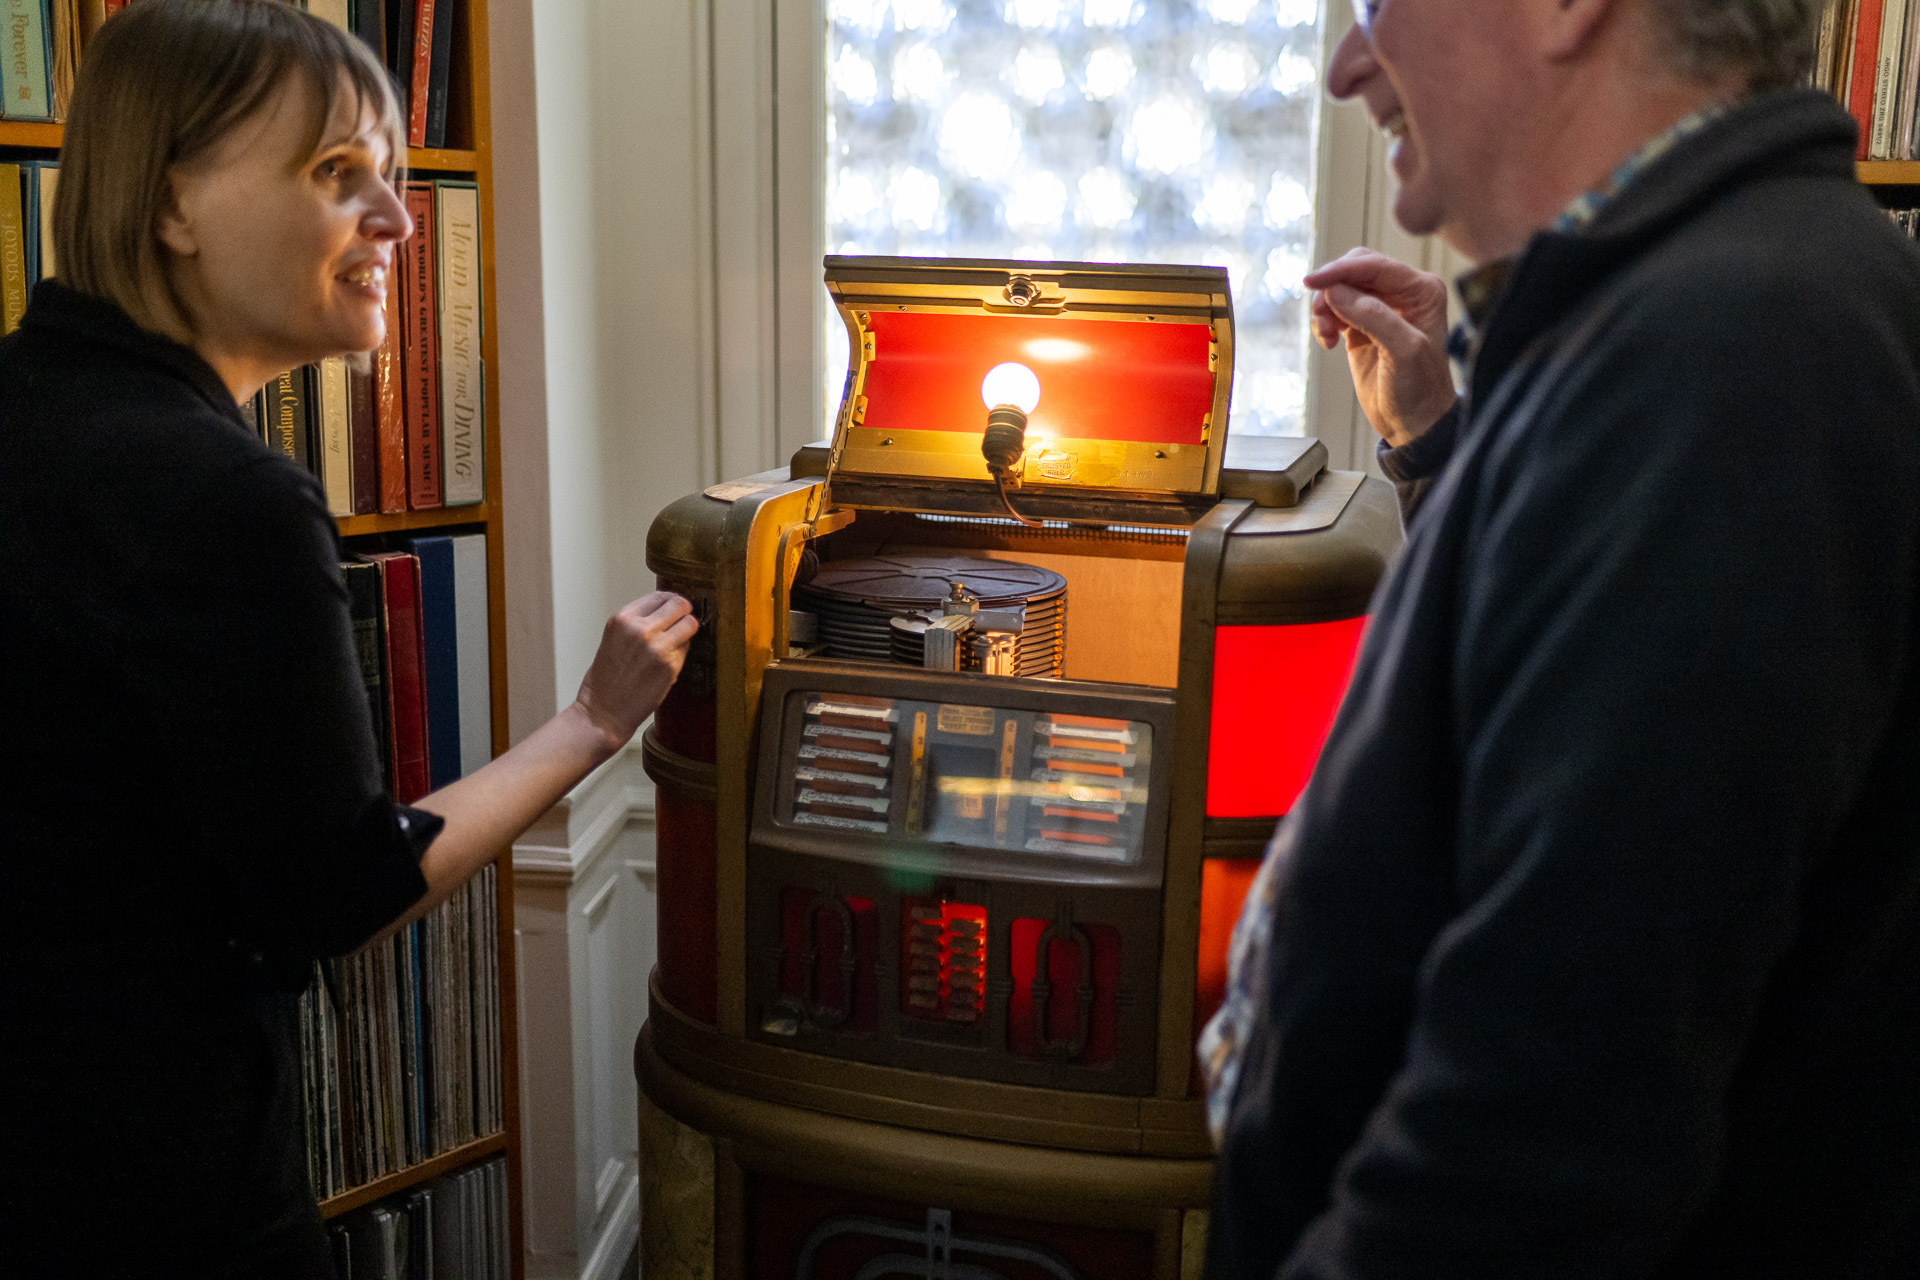 A white woman with short brown hair stands facing a middle-aged white man, both smiling and engaged in conversation, with an old time record player in the background within a corridor which appears to be lined with vinyl records